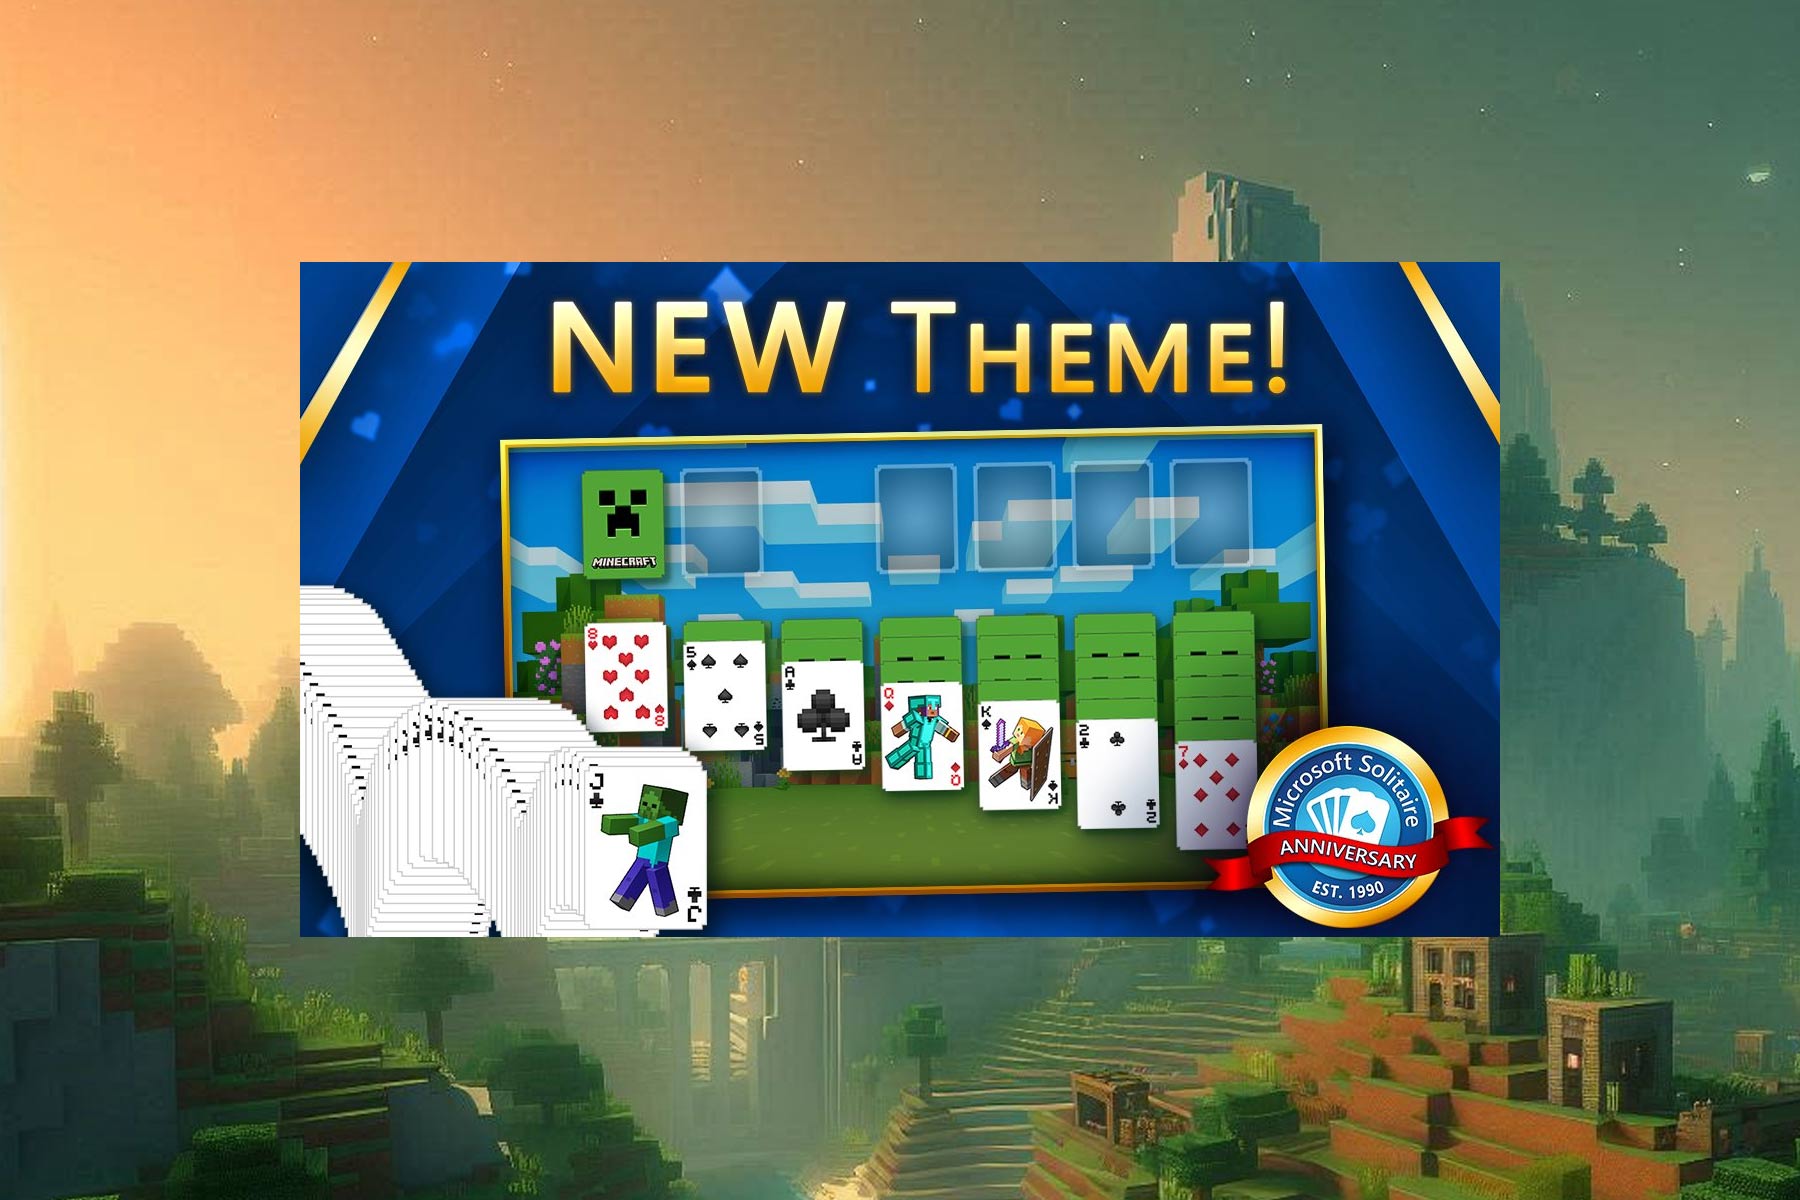 Microsoft Solitaire gets a Minecraft theme in the latest collaboration